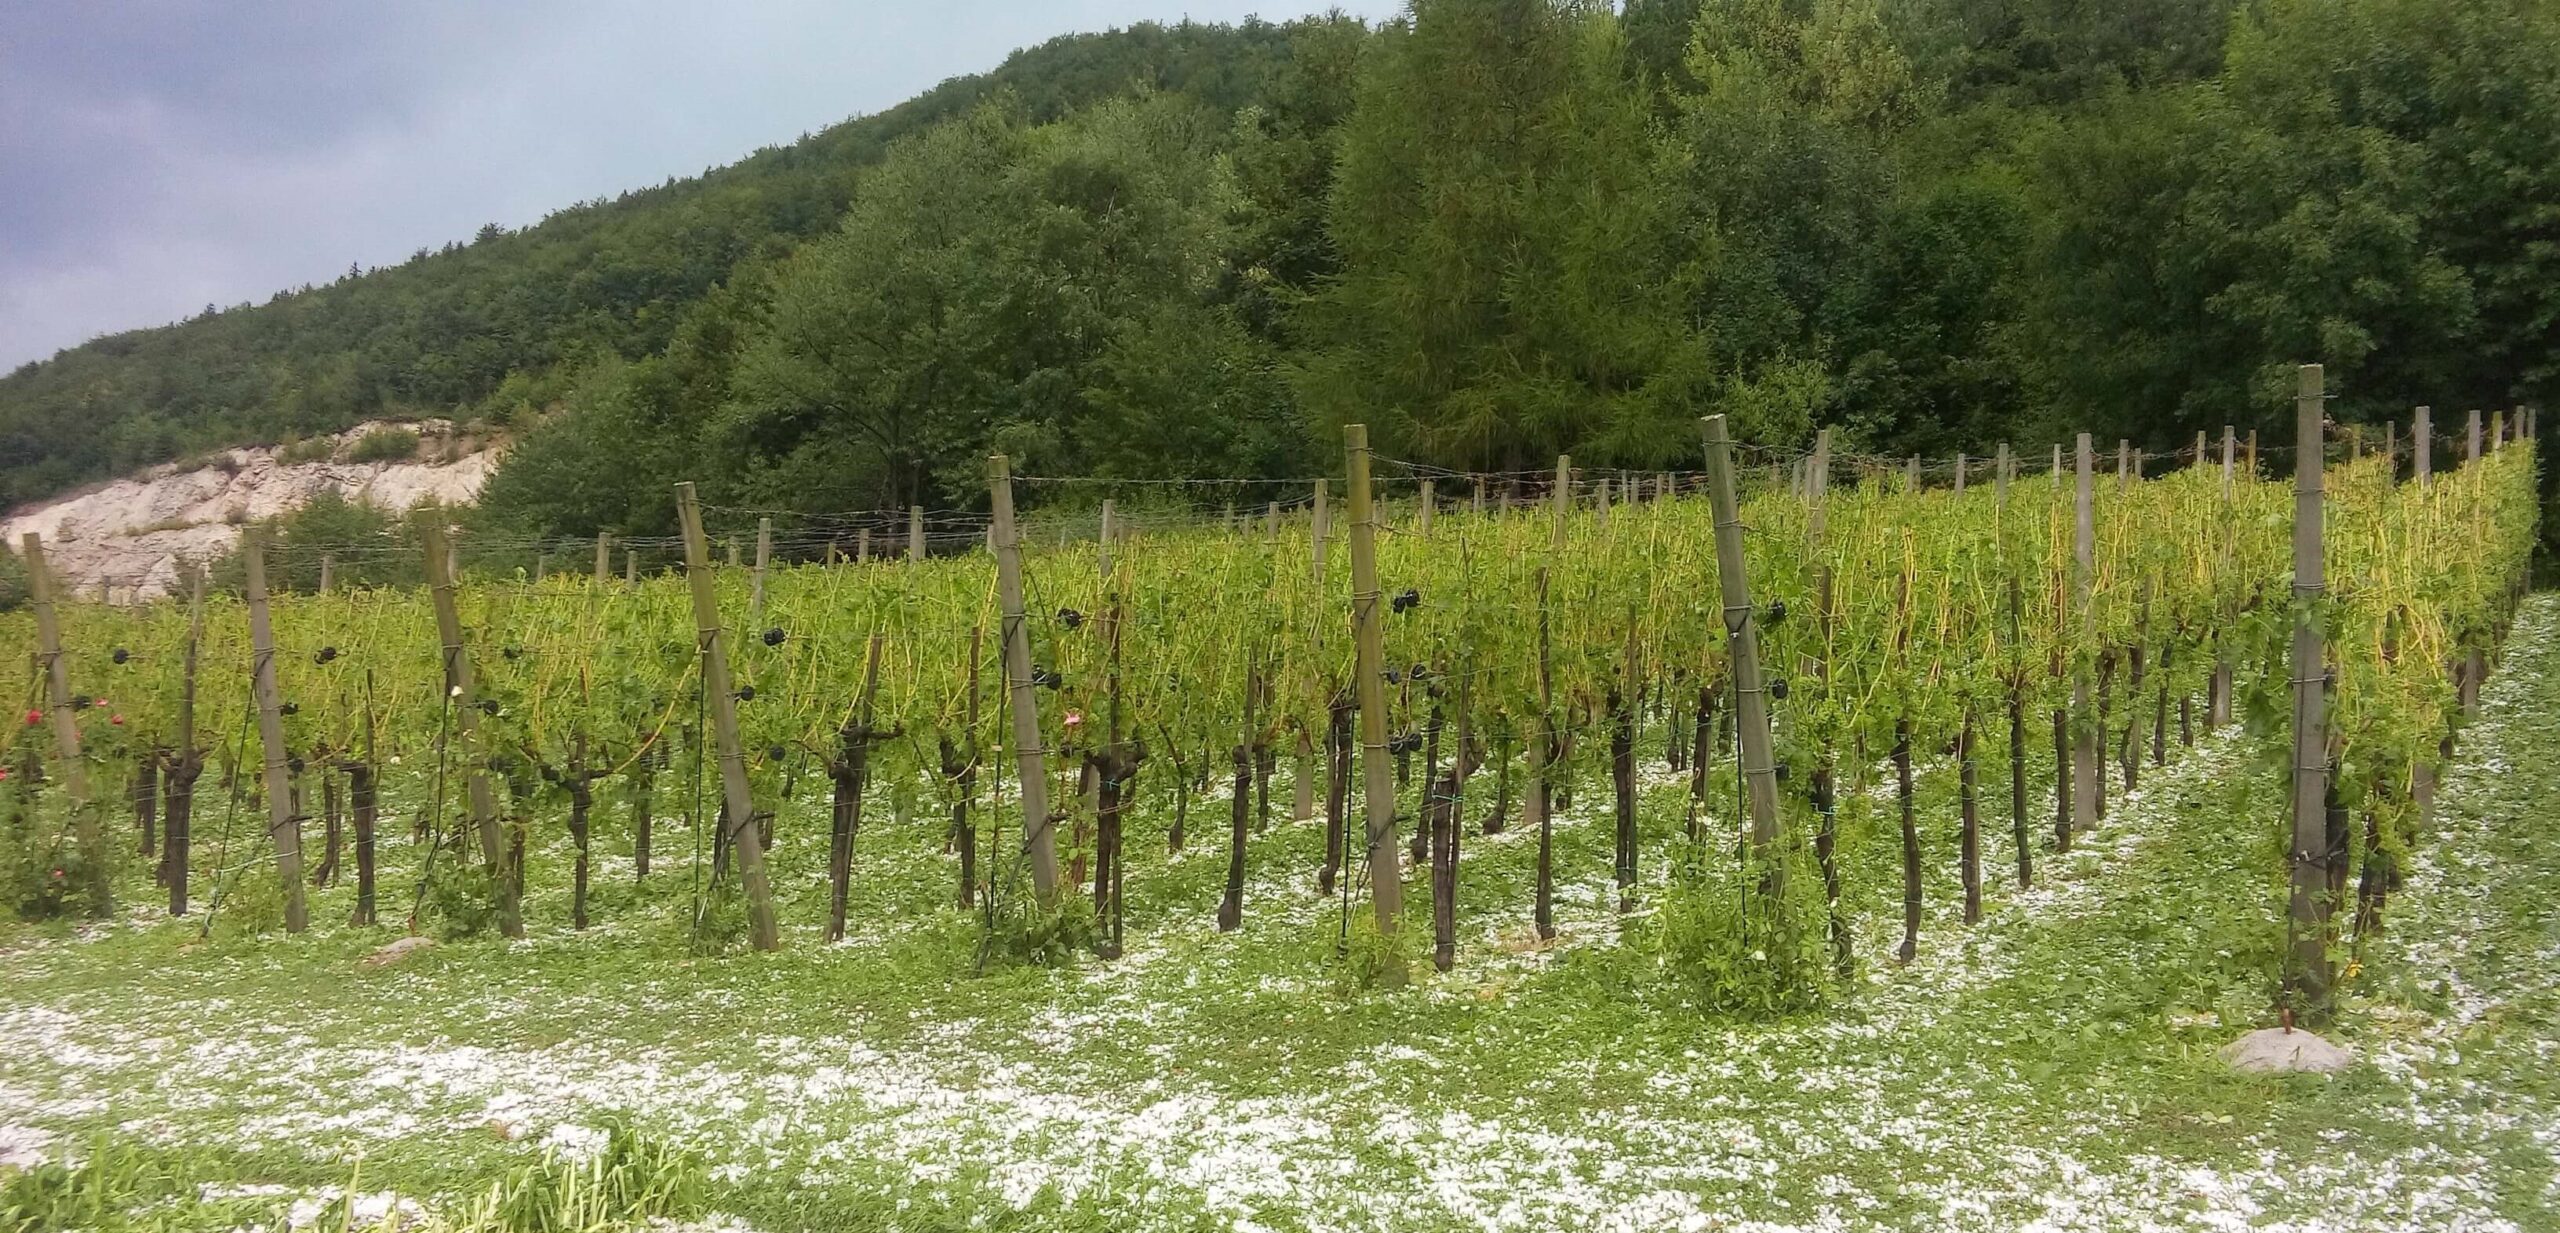 Hail in vineyards - damage, protection methods and management